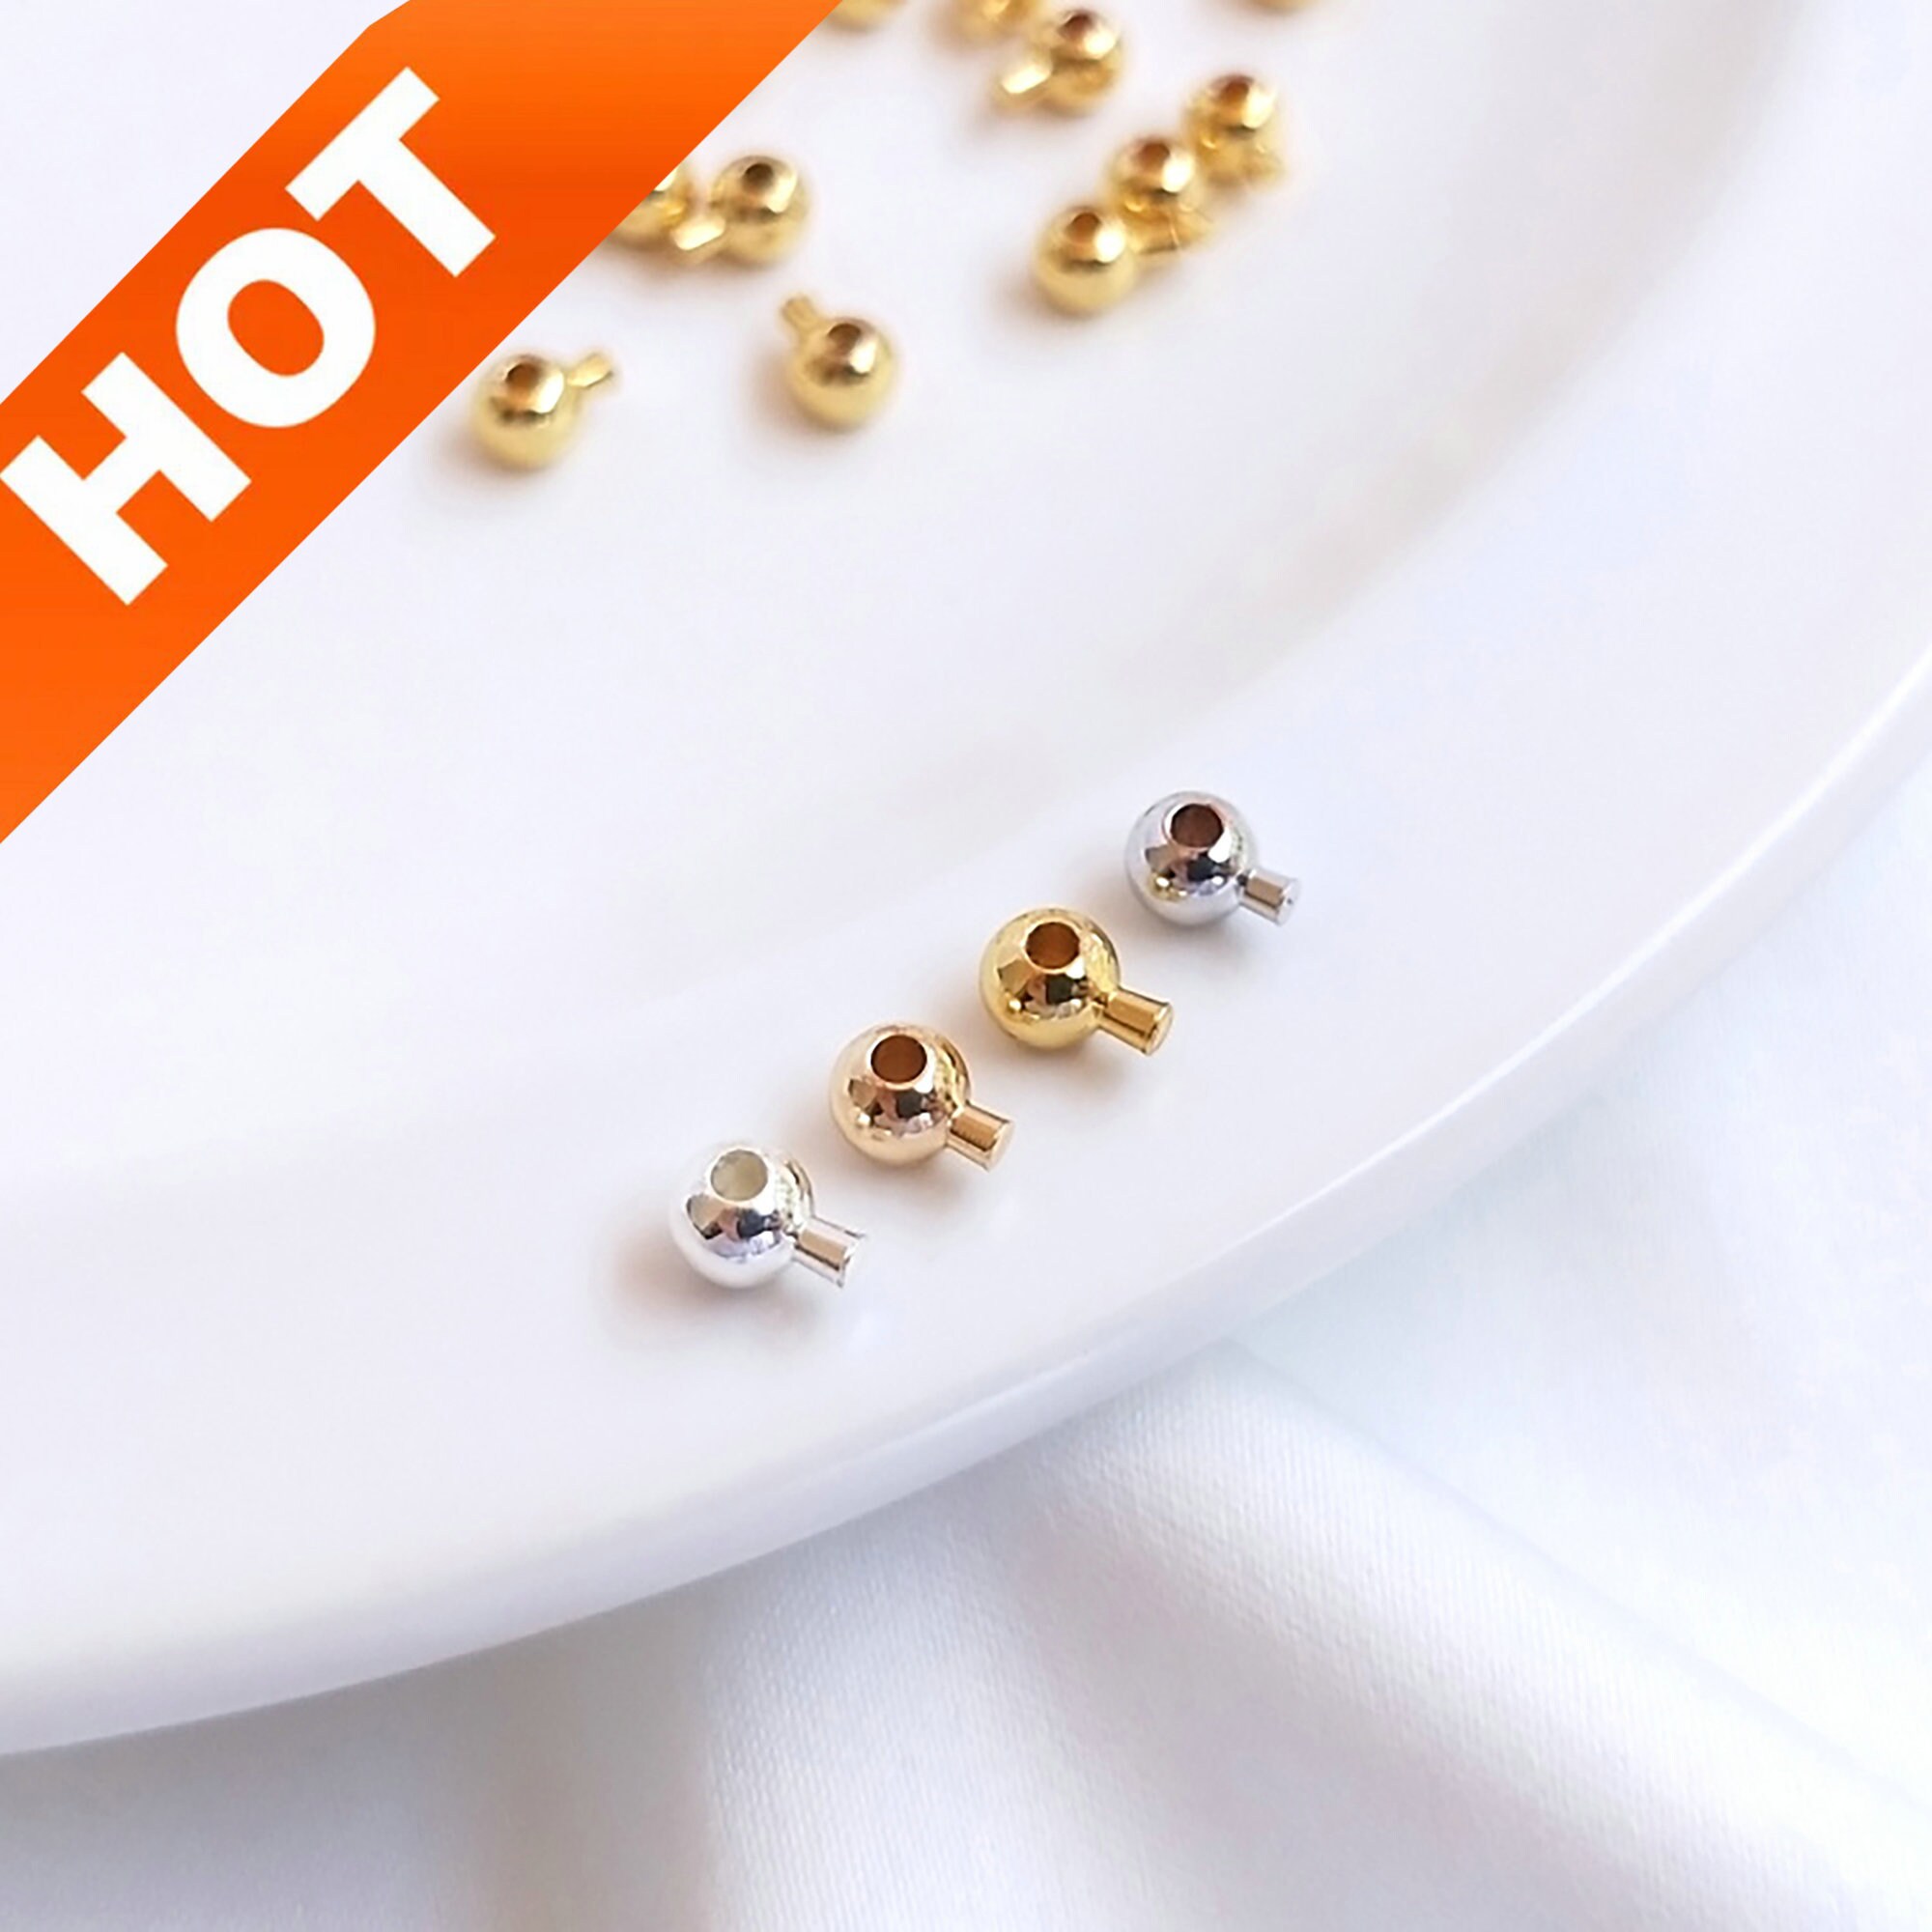 BEADIA 18K Gold Plated End Caps Non Tarnish 3x6mm 200pcs for Jewelry Making  Findings